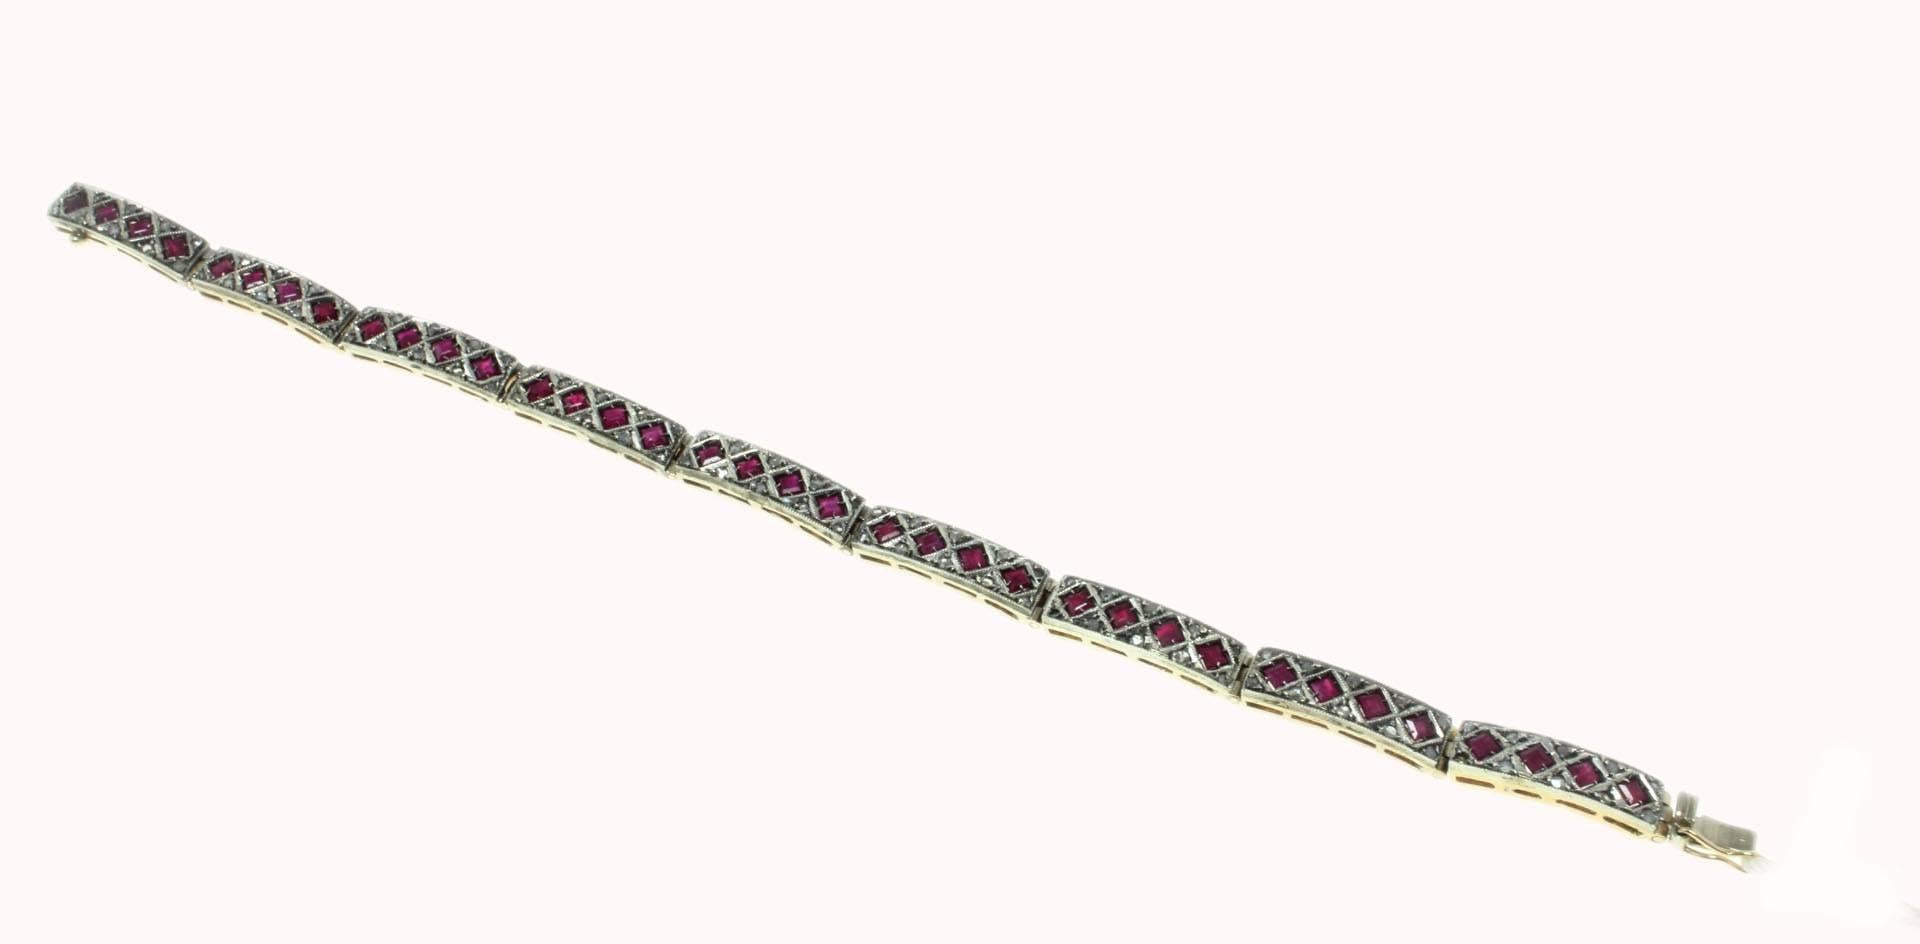 Classic retro bracelet composed of rhombus shaped rubies surrounded of diamonds. All is mounted in 14 Kt rose gold and silver.
Tot weight  18.9 g
Rubies 4.41 ct
Diamonds 0.63 ct

Rf. giar